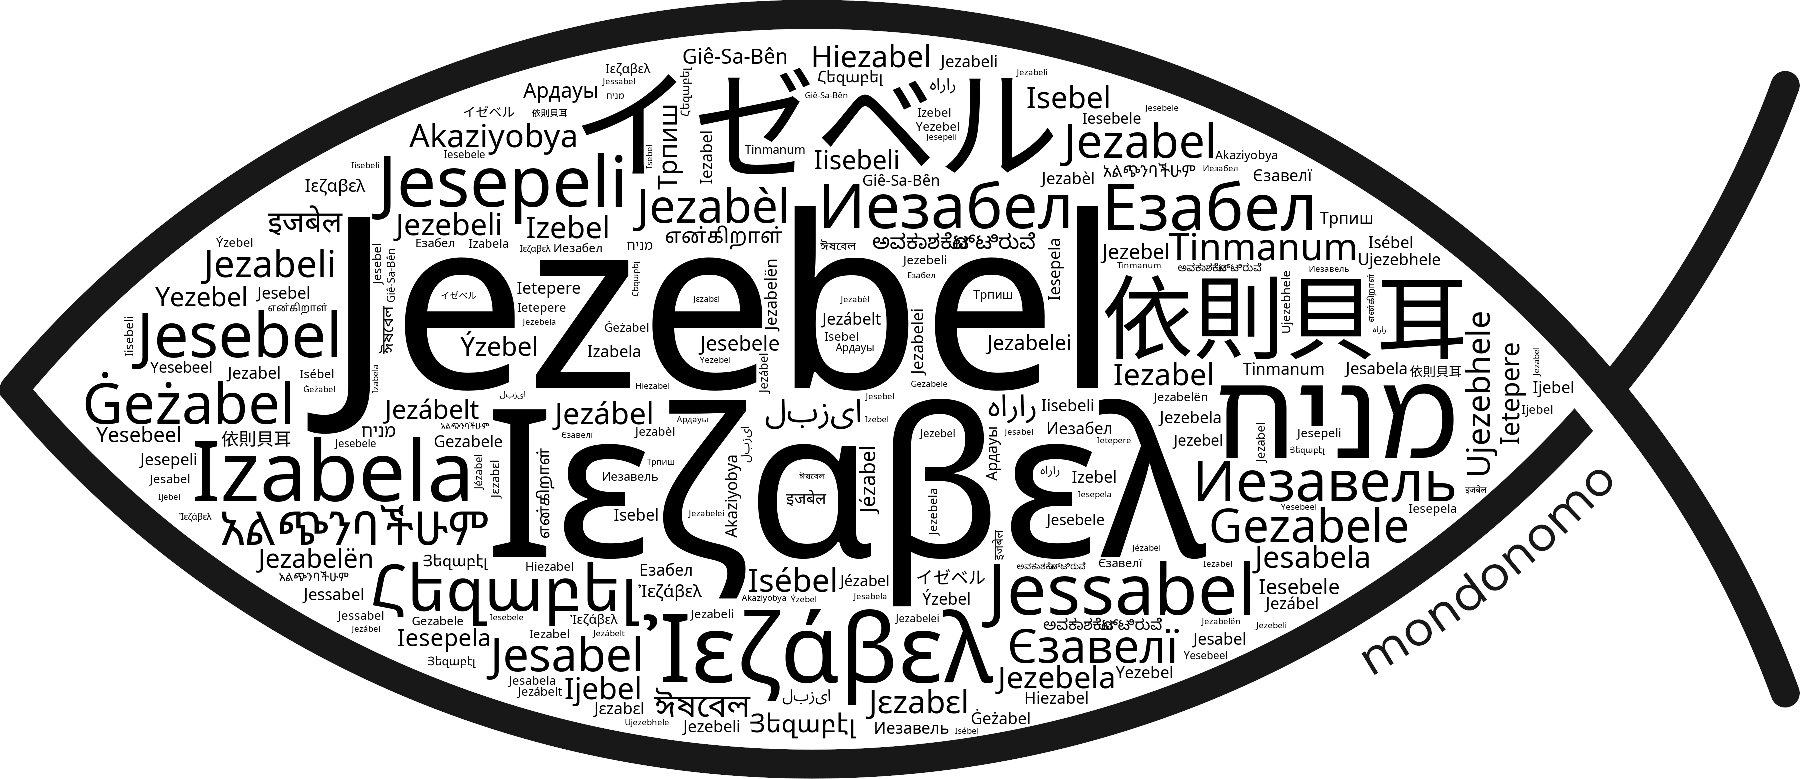 Name Jezebel in the world's Bibles